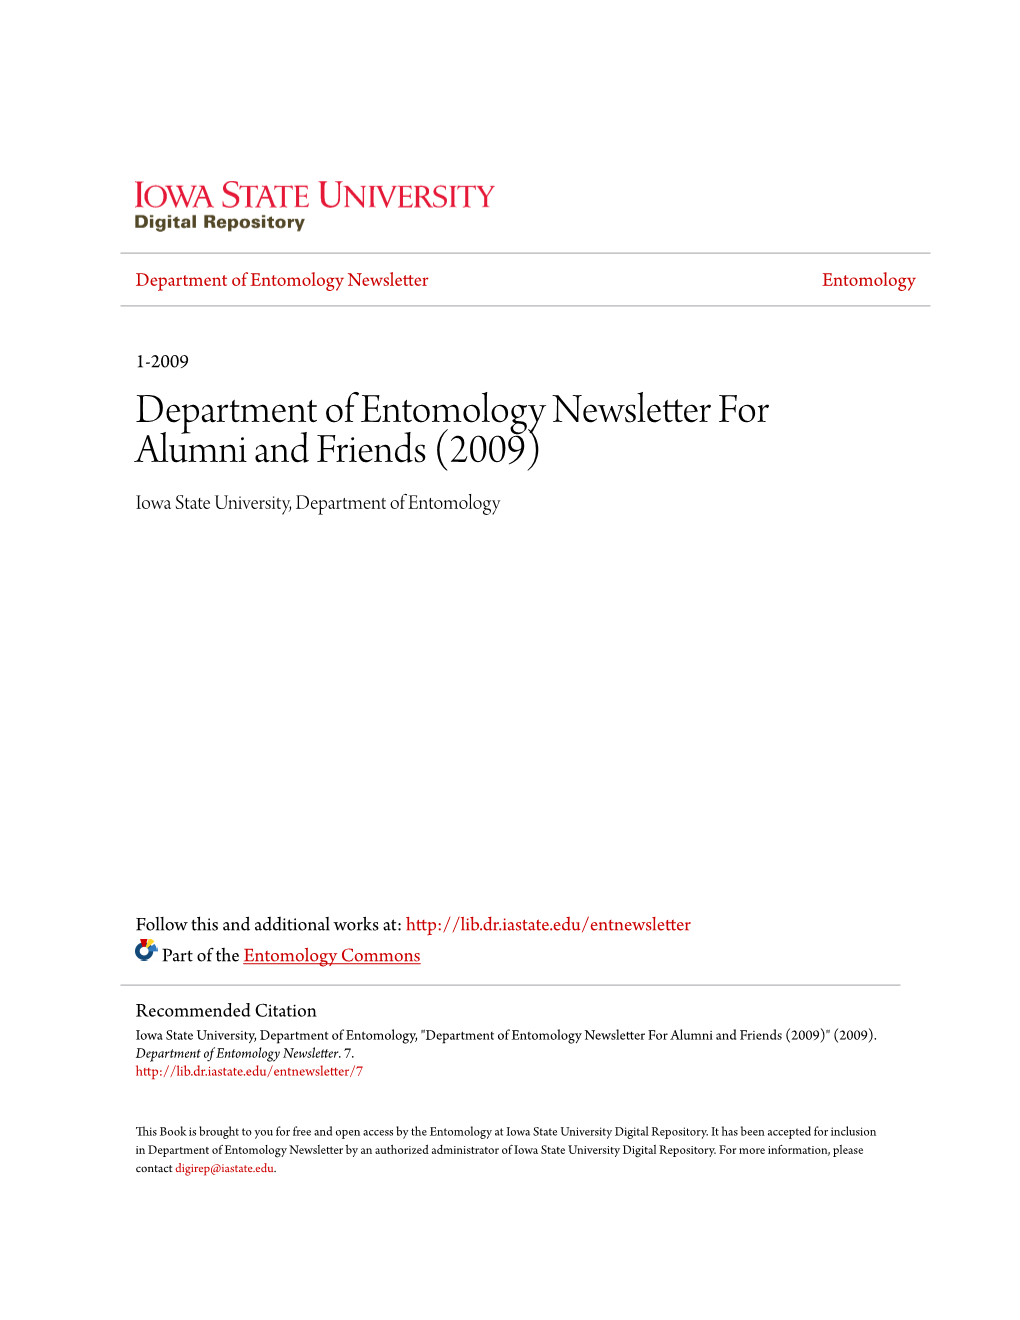 Department of Entomology Newsletter for Alumni and Friends (2009) Iowa State University, Department of Entomology